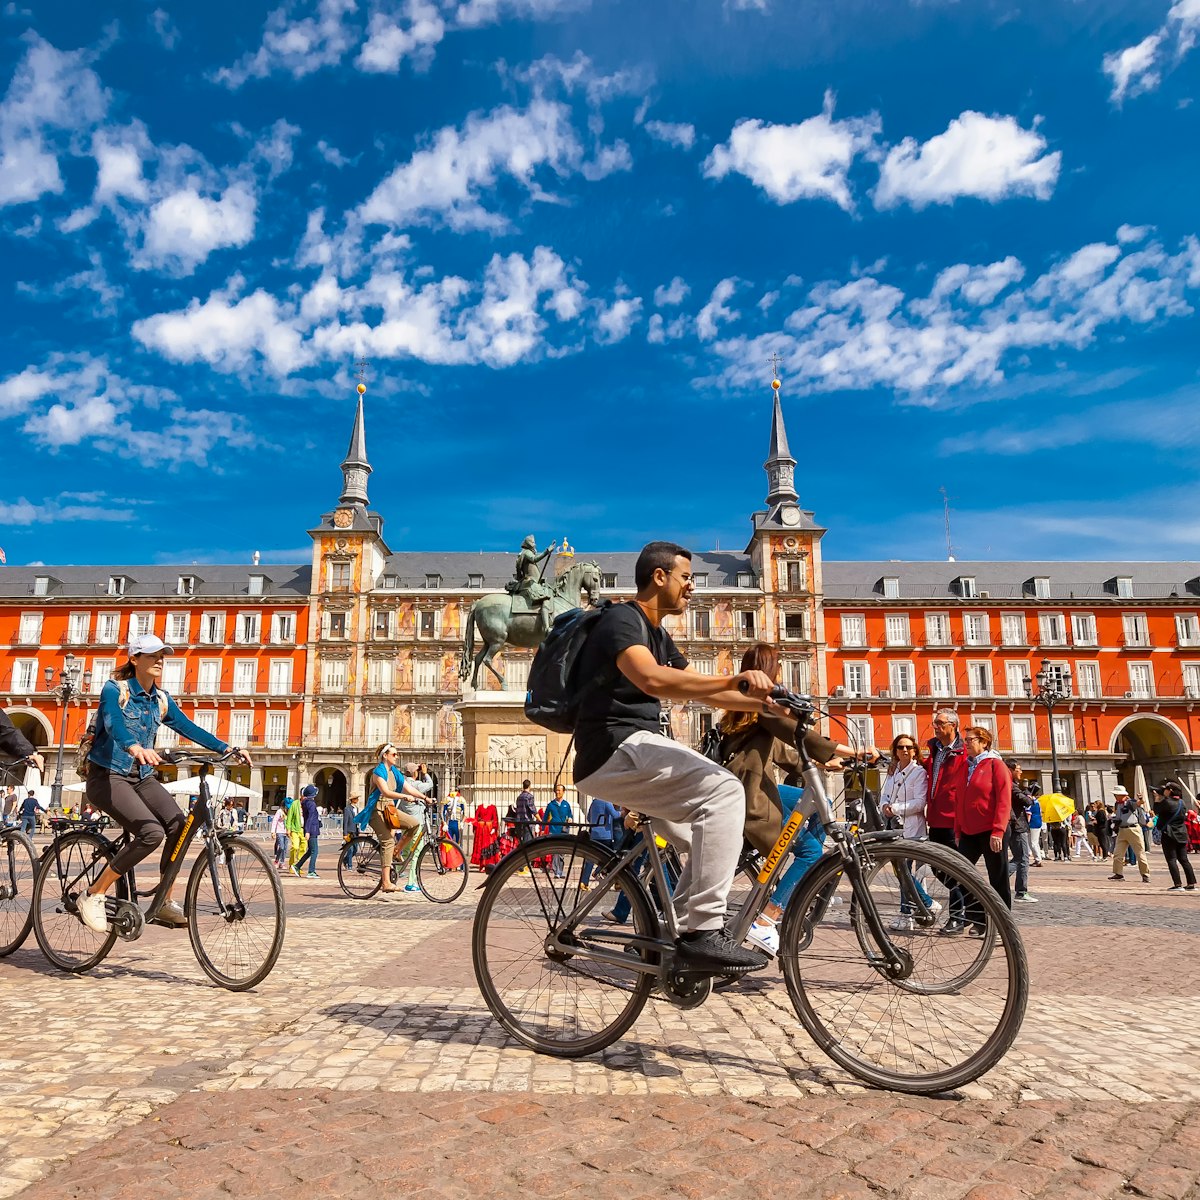 Spain, Madrid..A view of  La Plaza Mayor square in Madrid where there were a group of tourists riding bicycles. The Plaza Mayor square is one of the most famous squares in the town and located in the city center. People walk and cycle through the streets.The Plaza Mayor (Main Square) was built during Philip III's reign (1598–1621).